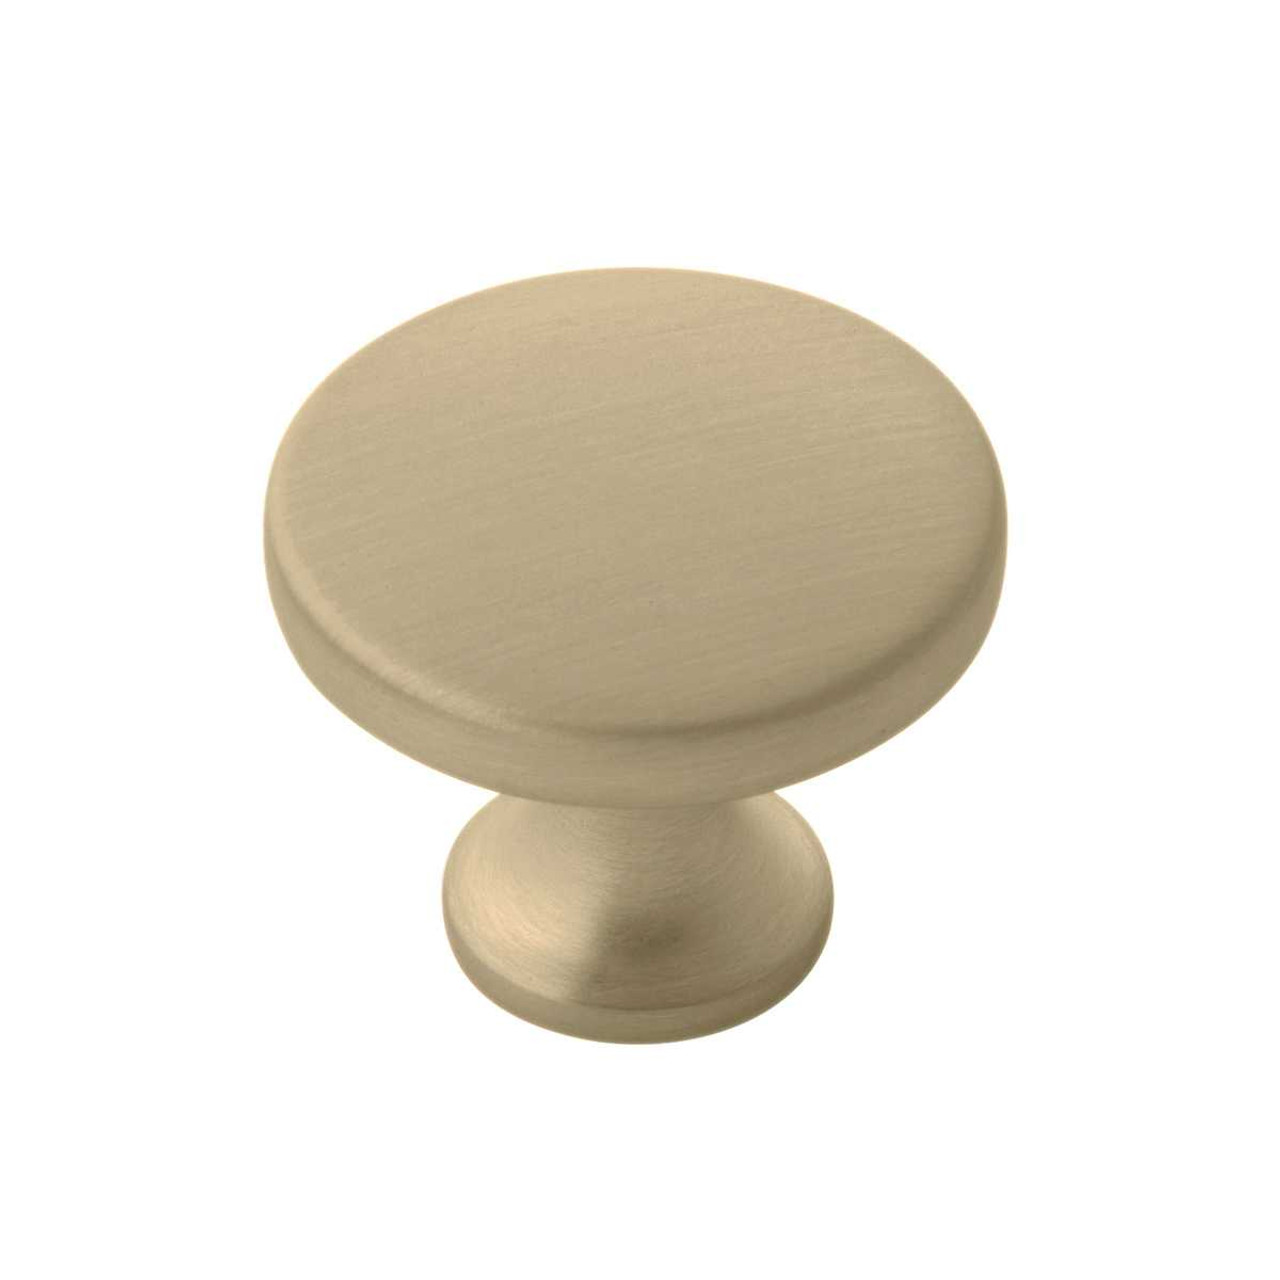 Hickory Hardware Forge Brushed Brass Cabinet Knob at The Knob Shop